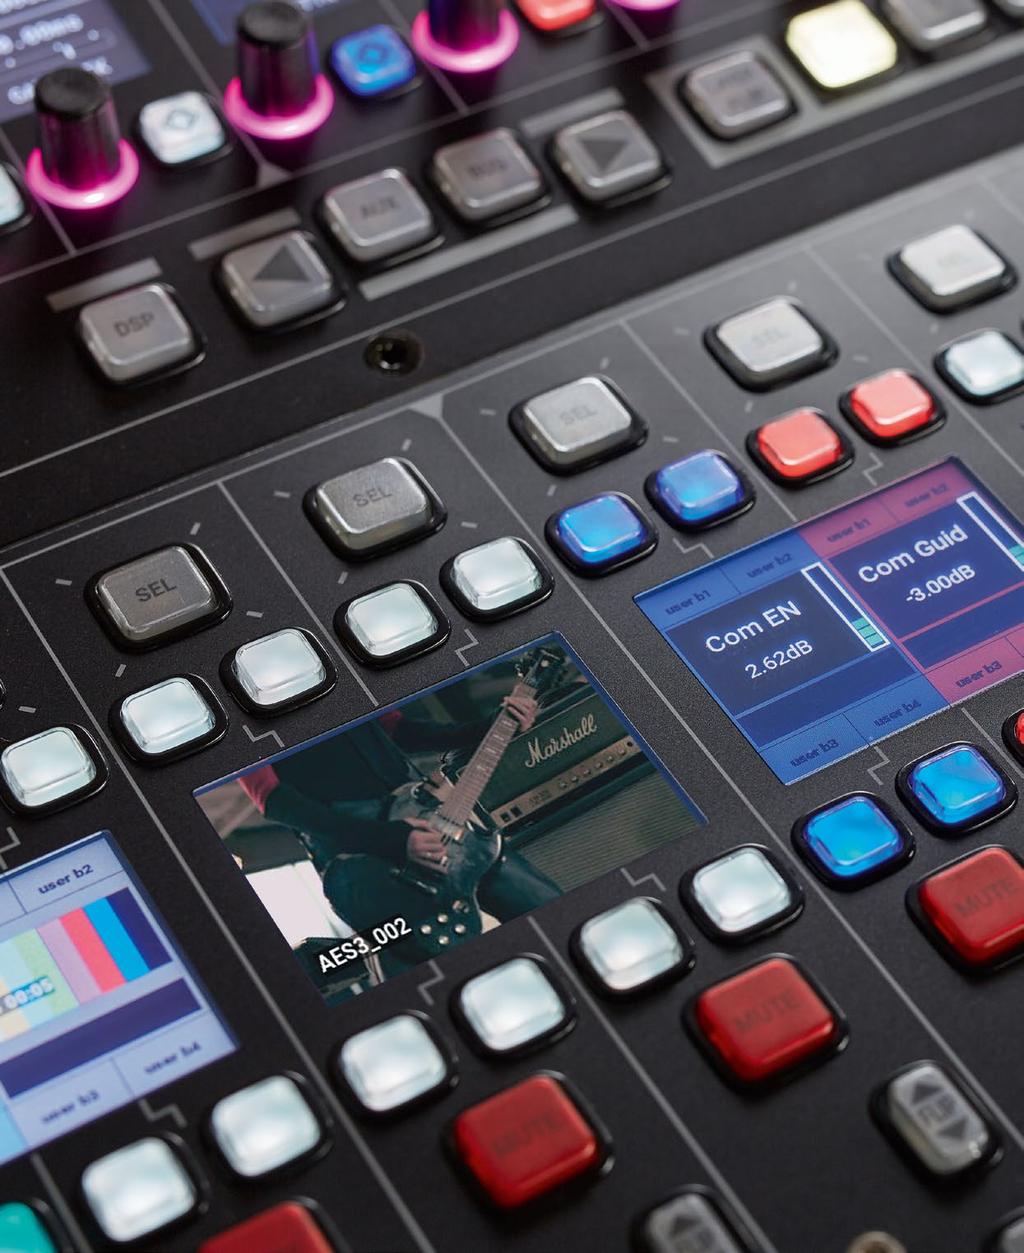 HIGHLIGHTS FADER BAYS COLOR CODING INPUT METERING CUSTOMIZABLE FADER USER BUTTONS LIVEVIEW VIDEO LABELS In addition to standard channel labeling via channel numbers, individual text labels and static